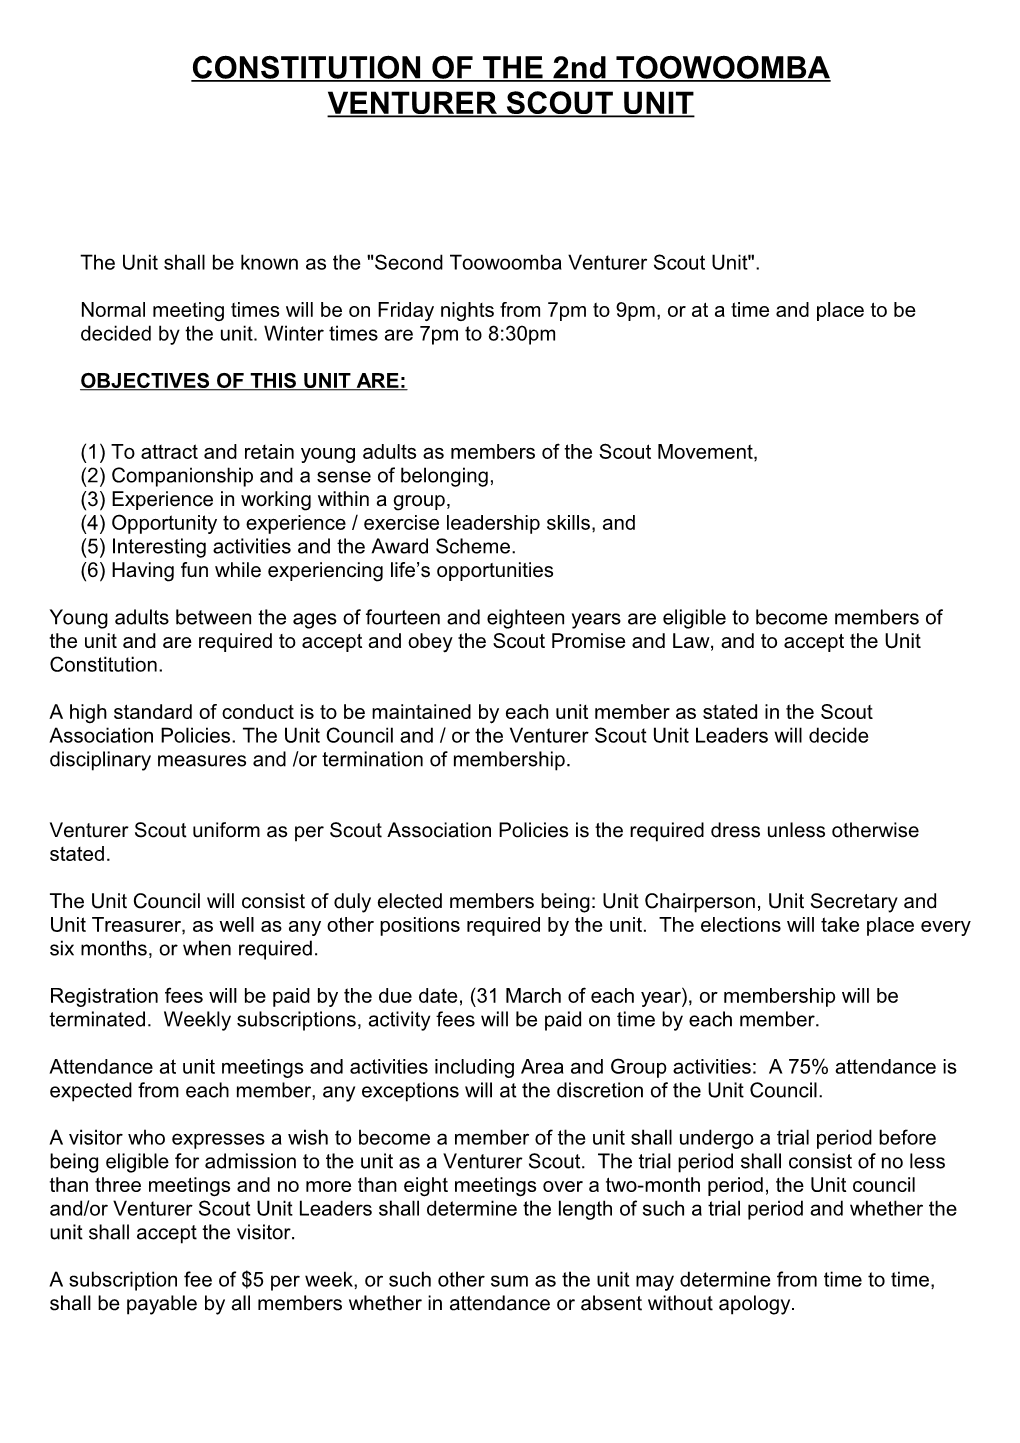 CONSTITUTION of the 2Nd TOOWOOMBA